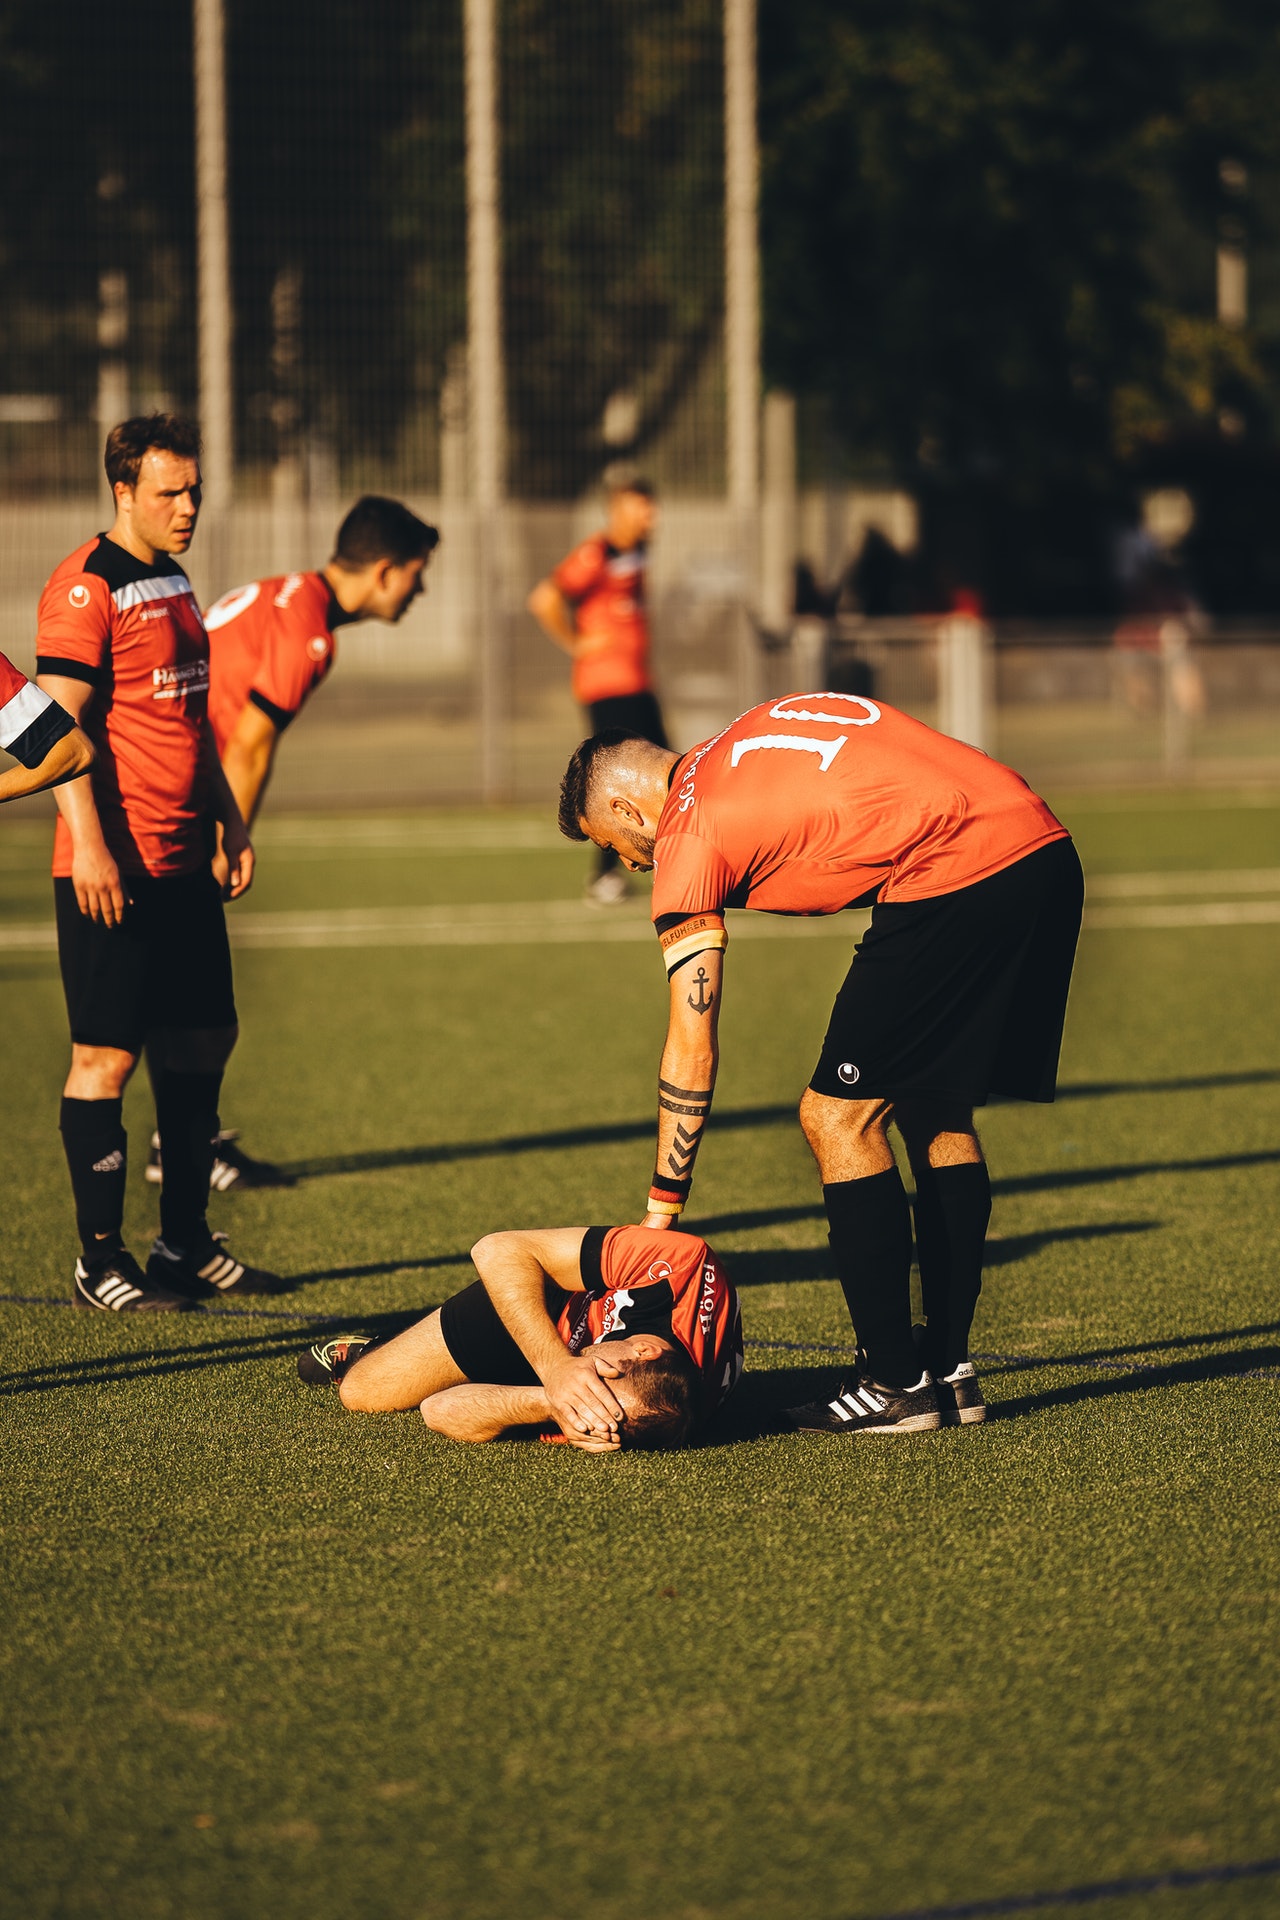 Why Are Soccer Players So Dramatic? (Explained!)